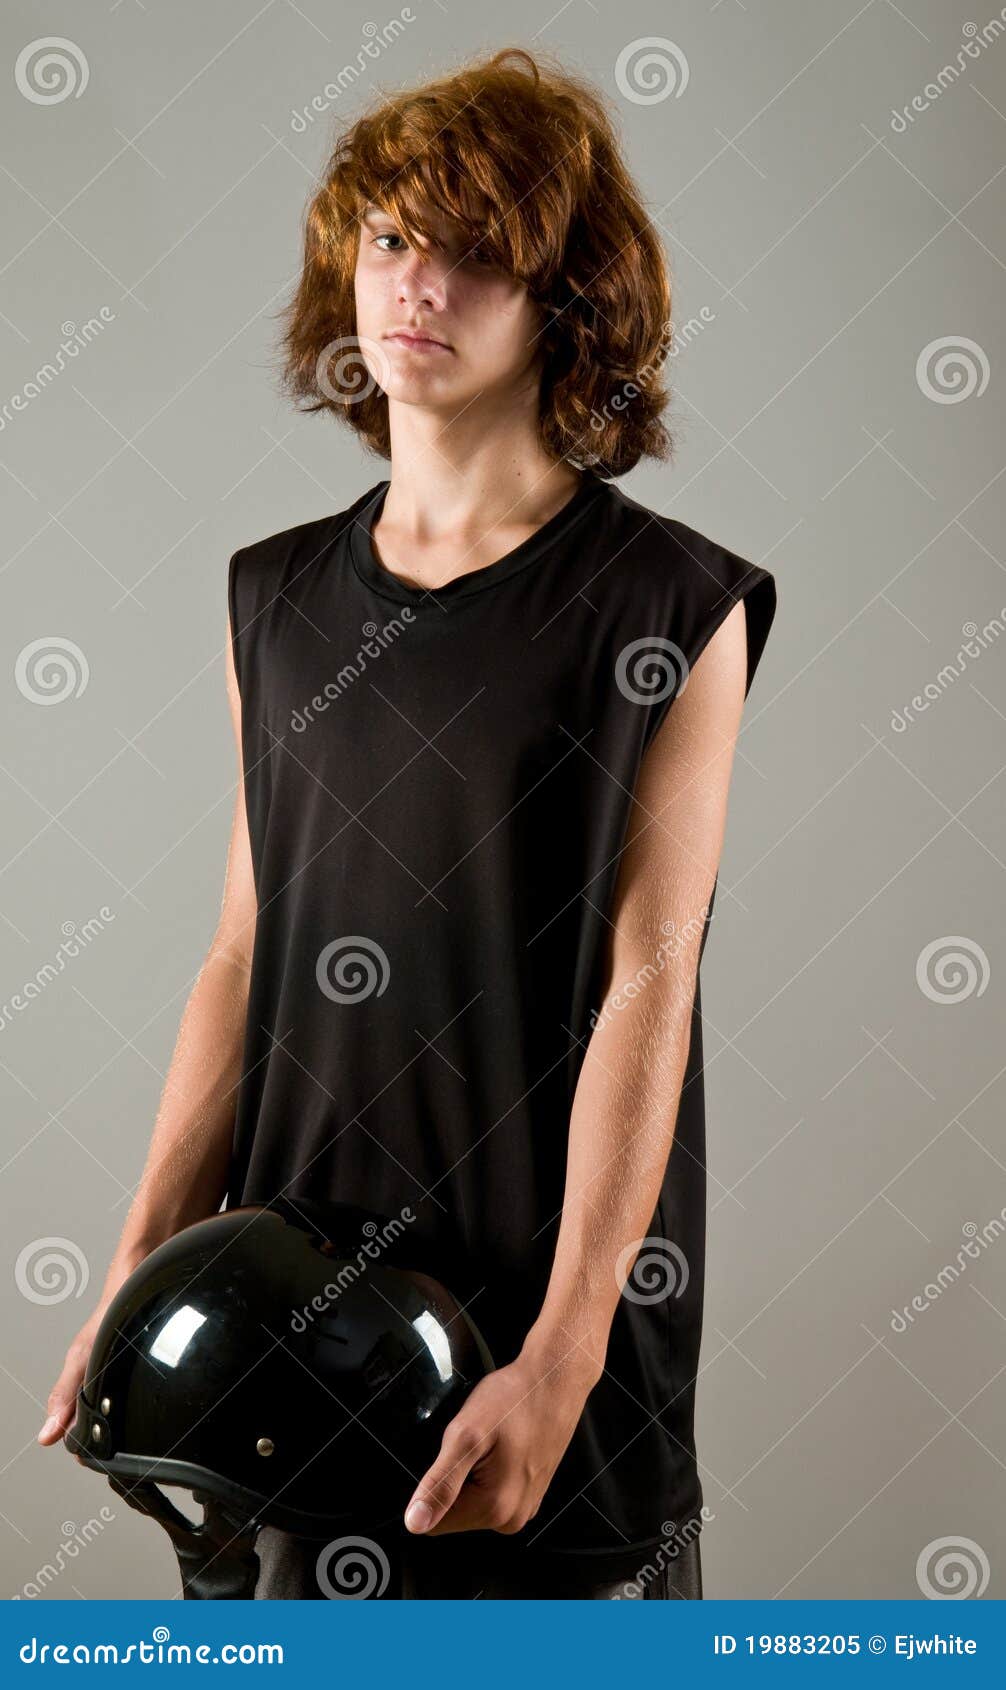 Young Biker - Boy with Motorcycle Helmet Stock Image - Image of male,  adolescence: 19883205